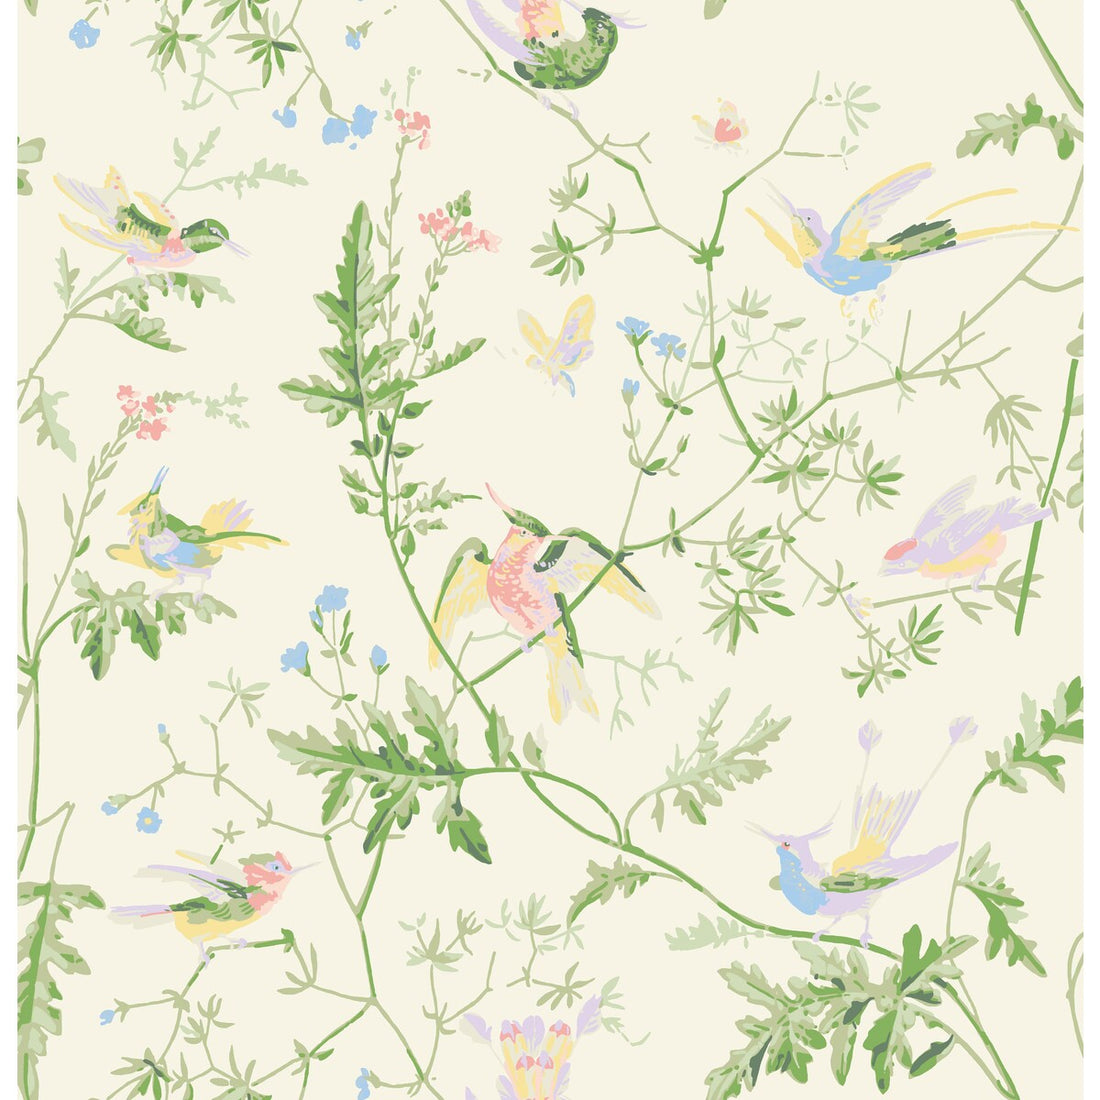 Hummingbirds fabric in bright multi color - pattern F111/1002.CS.0 - by Cole &amp; Son in the Cole &amp; Son Contemporary Fabrics collection